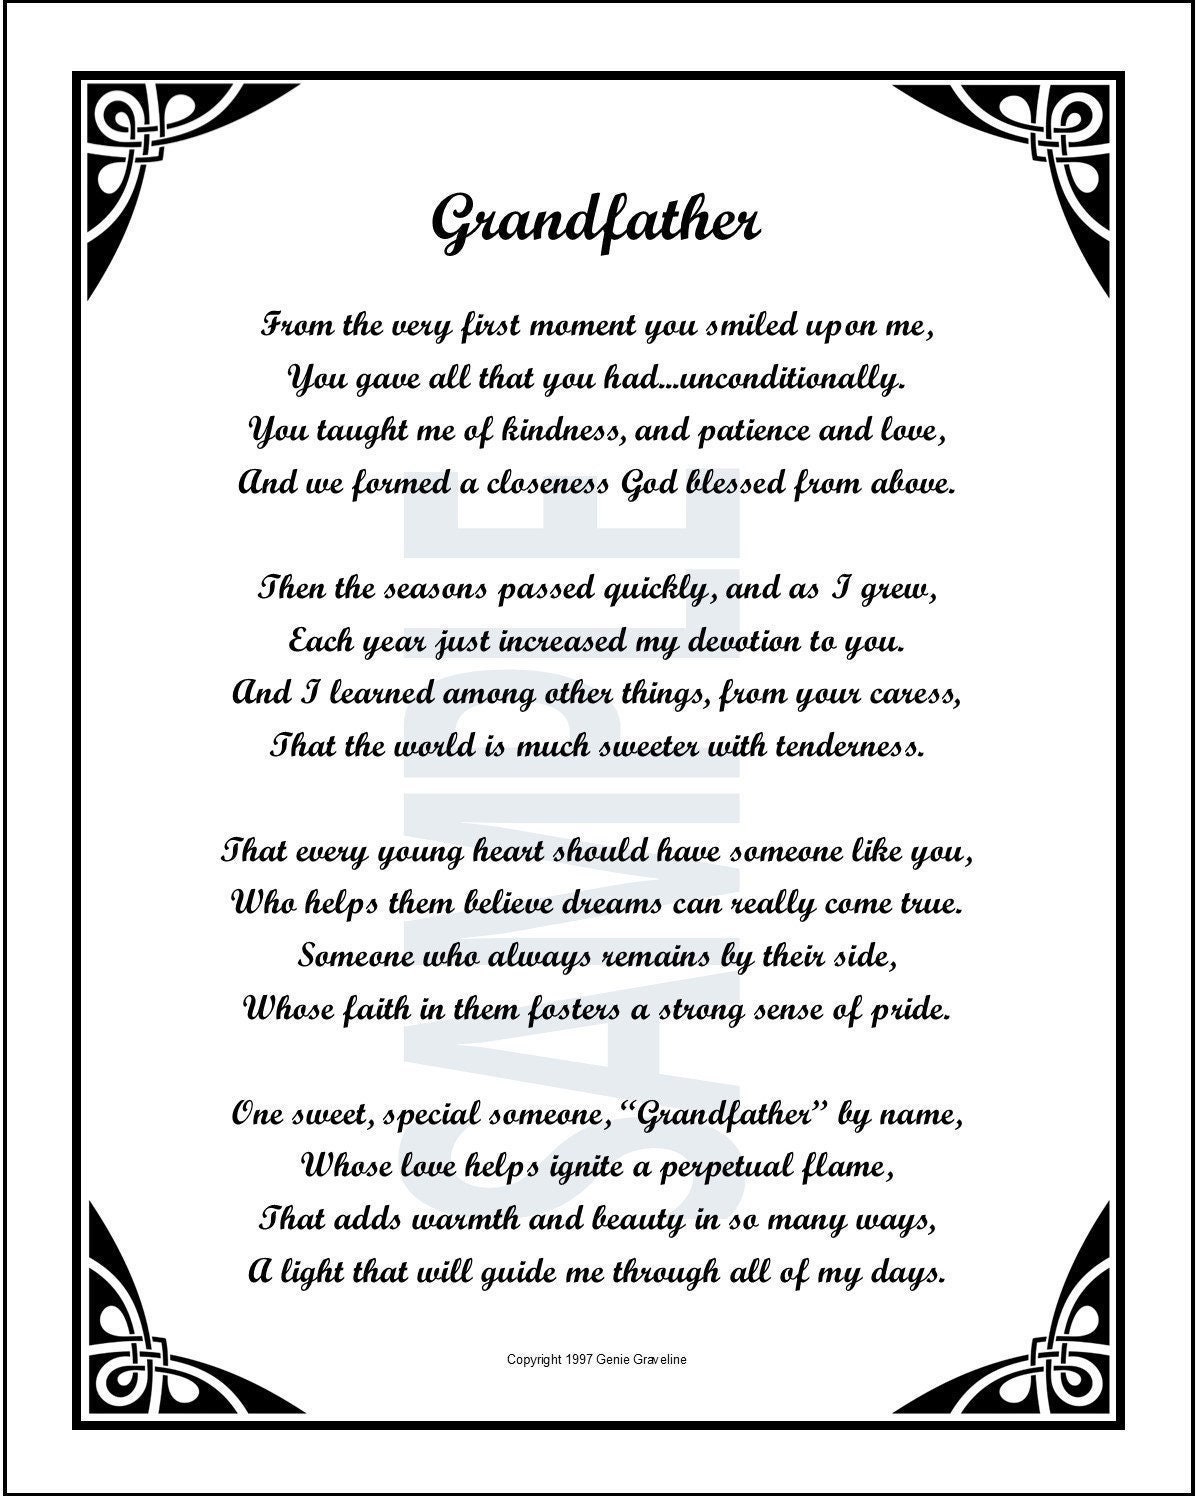 GRANDPA SPECIAL Kind Grandfathers PATIENT Guidance TREASURE verses poems plaques 